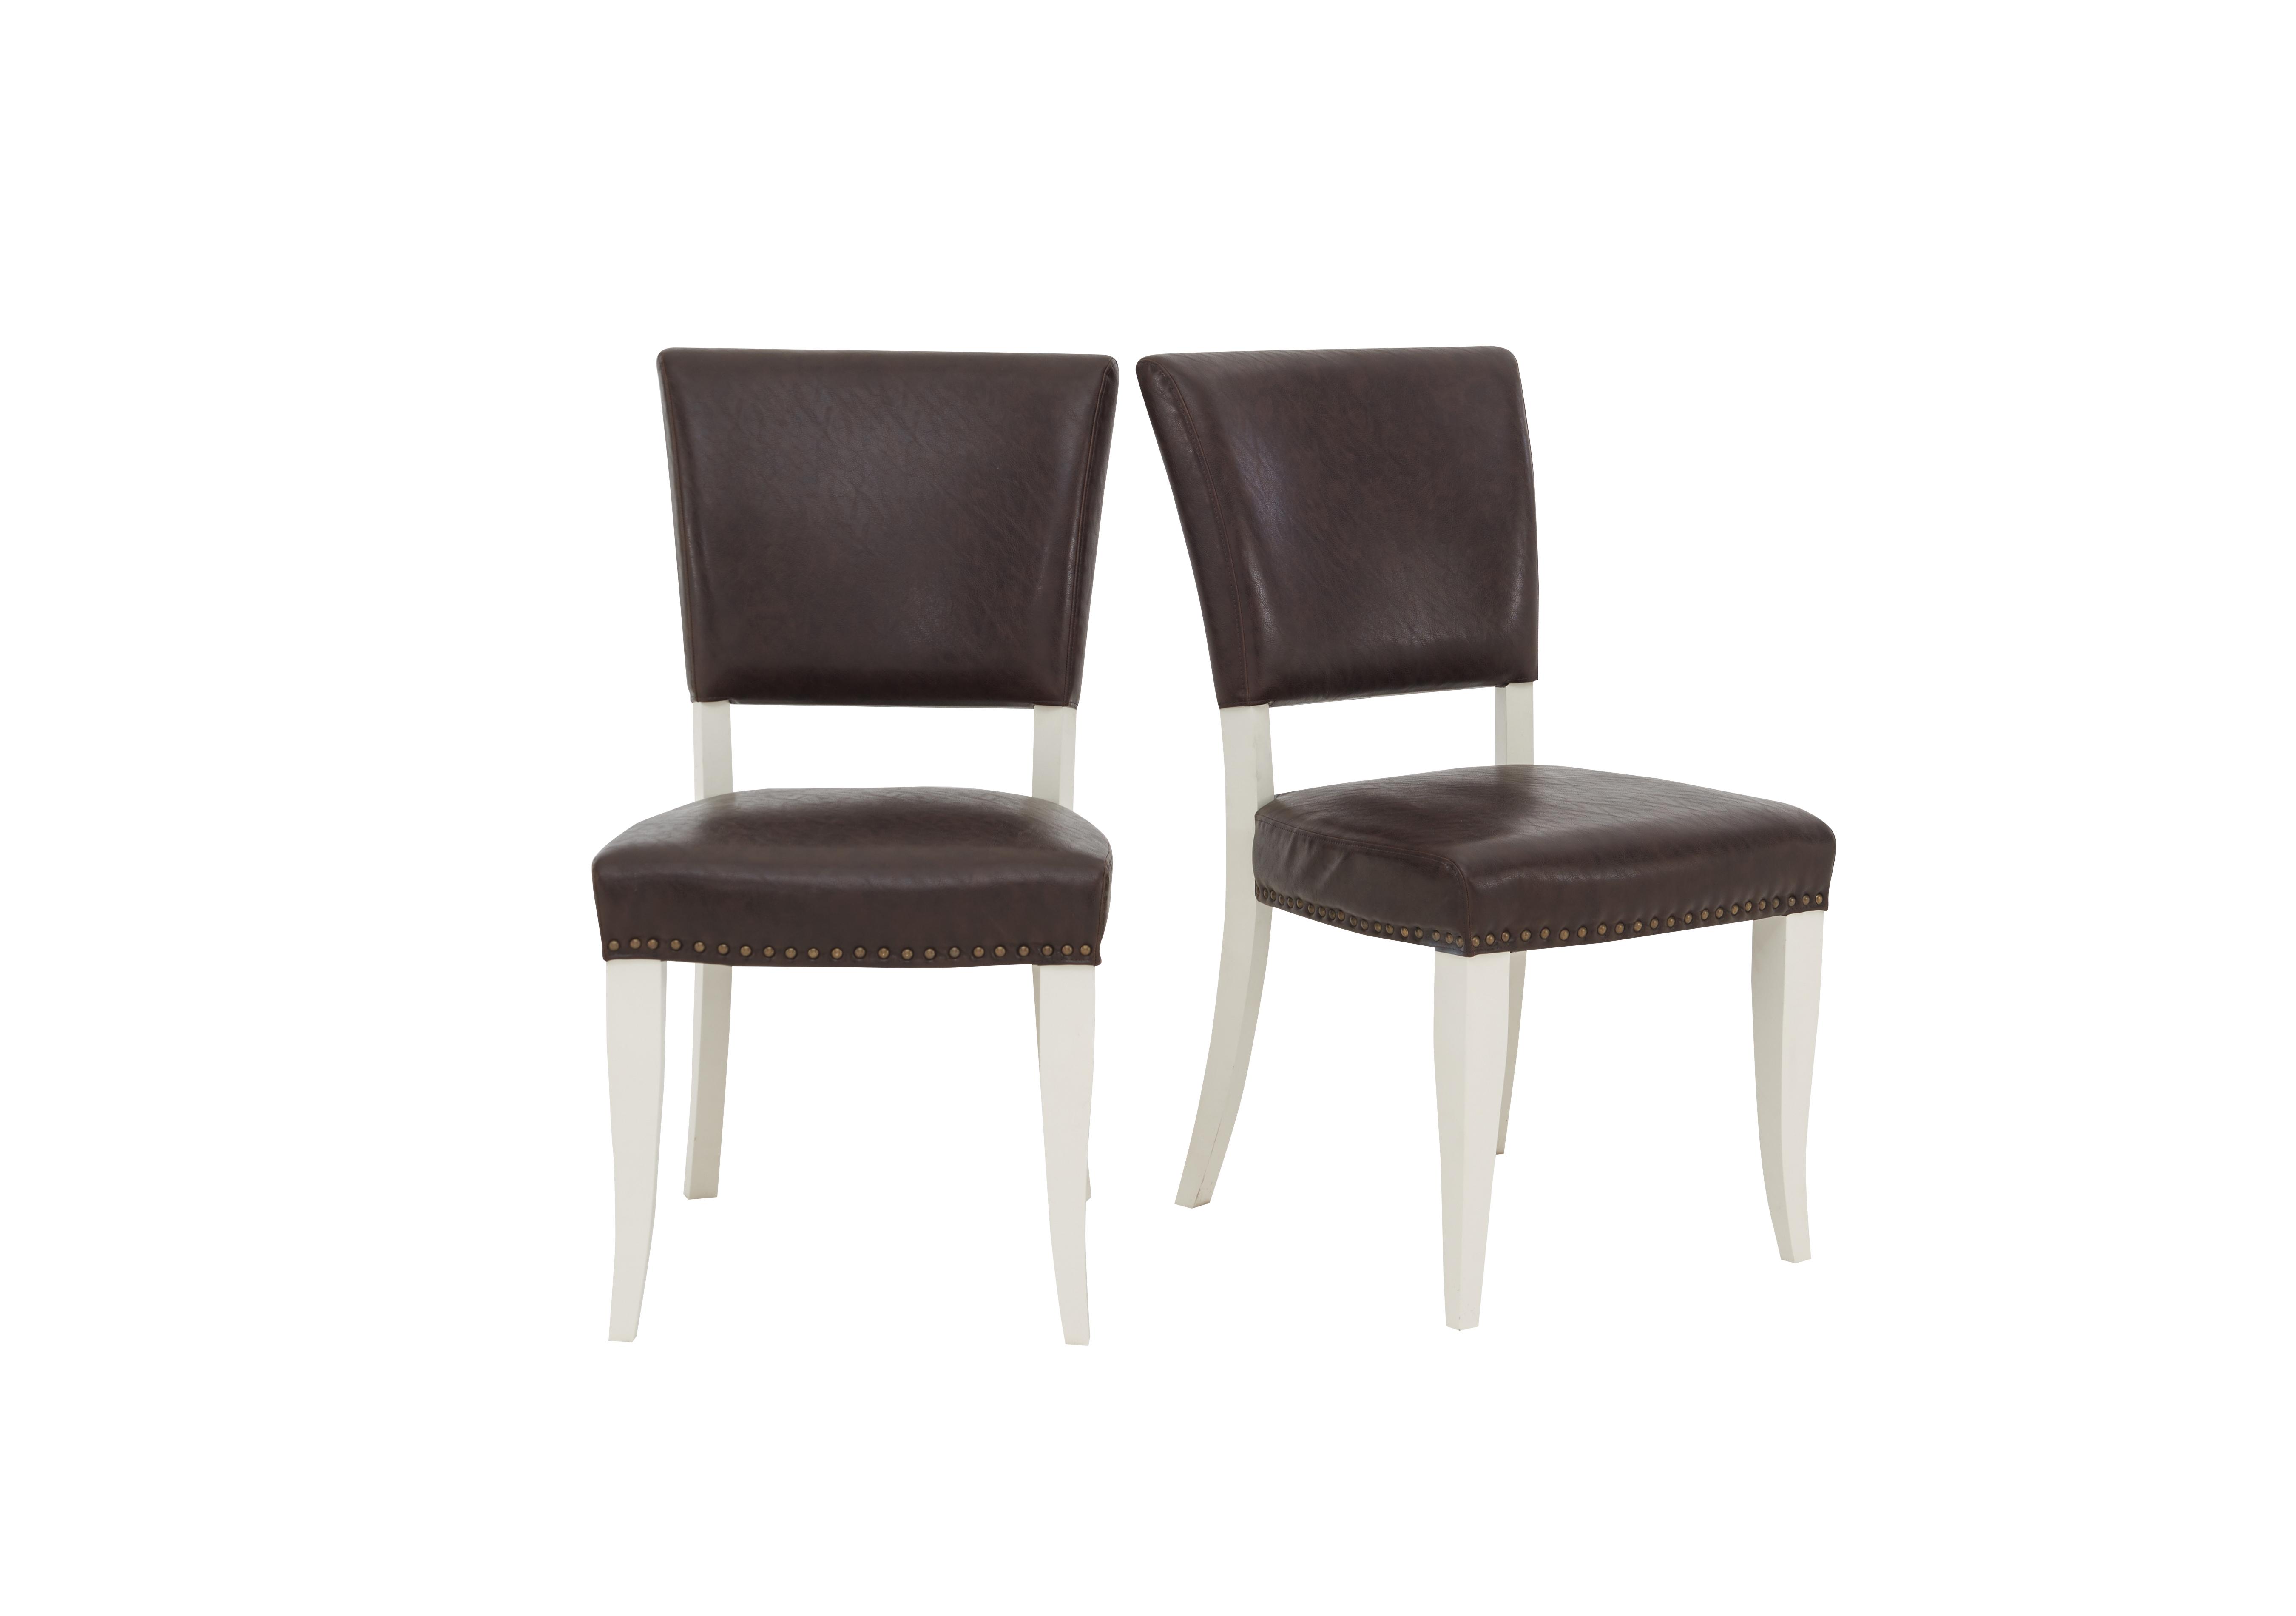 Pattern Pair of Dining Chairs in White Legs / Espresso Faux Lth on Furniture Village